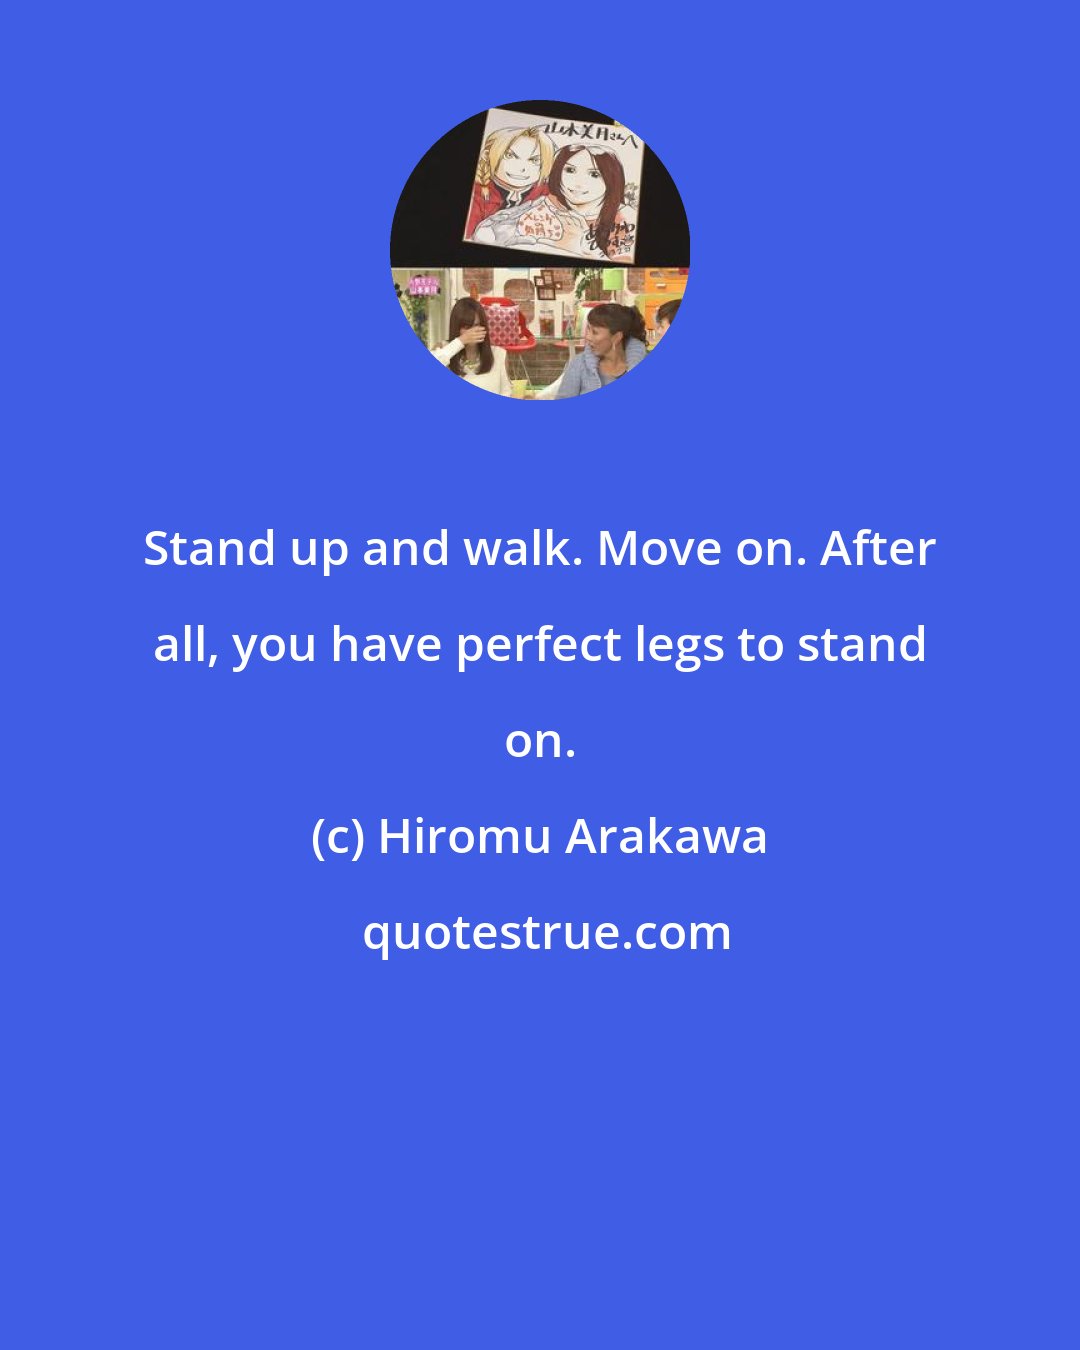 Hiromu Arakawa: Stand up and walk. Move on. After all, you have perfect legs to stand on.